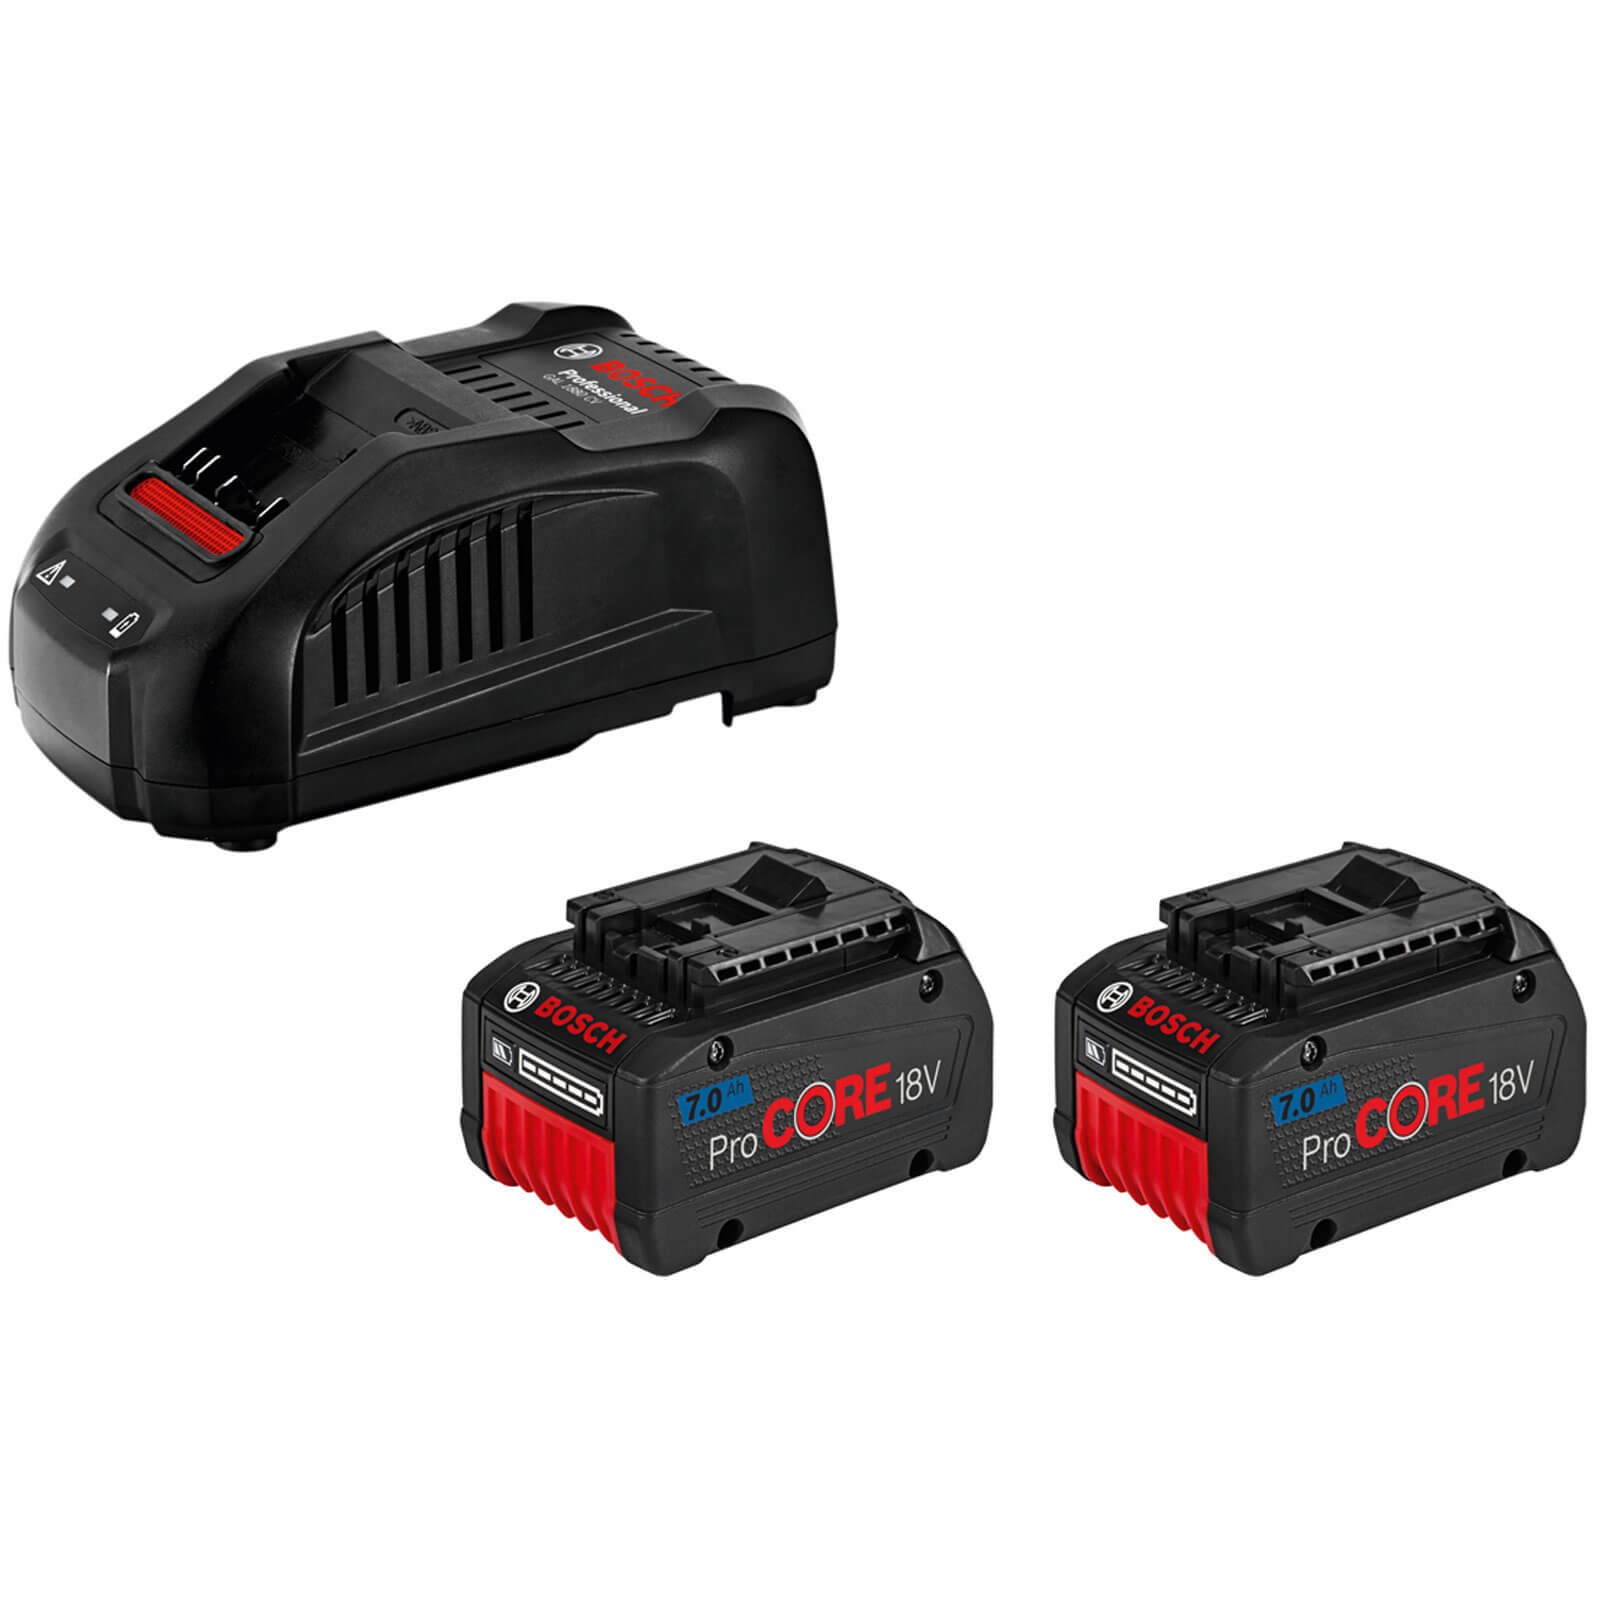 Bosch 18v Battery Charger and 2 ProCORE Li-ion Batteries 7ah